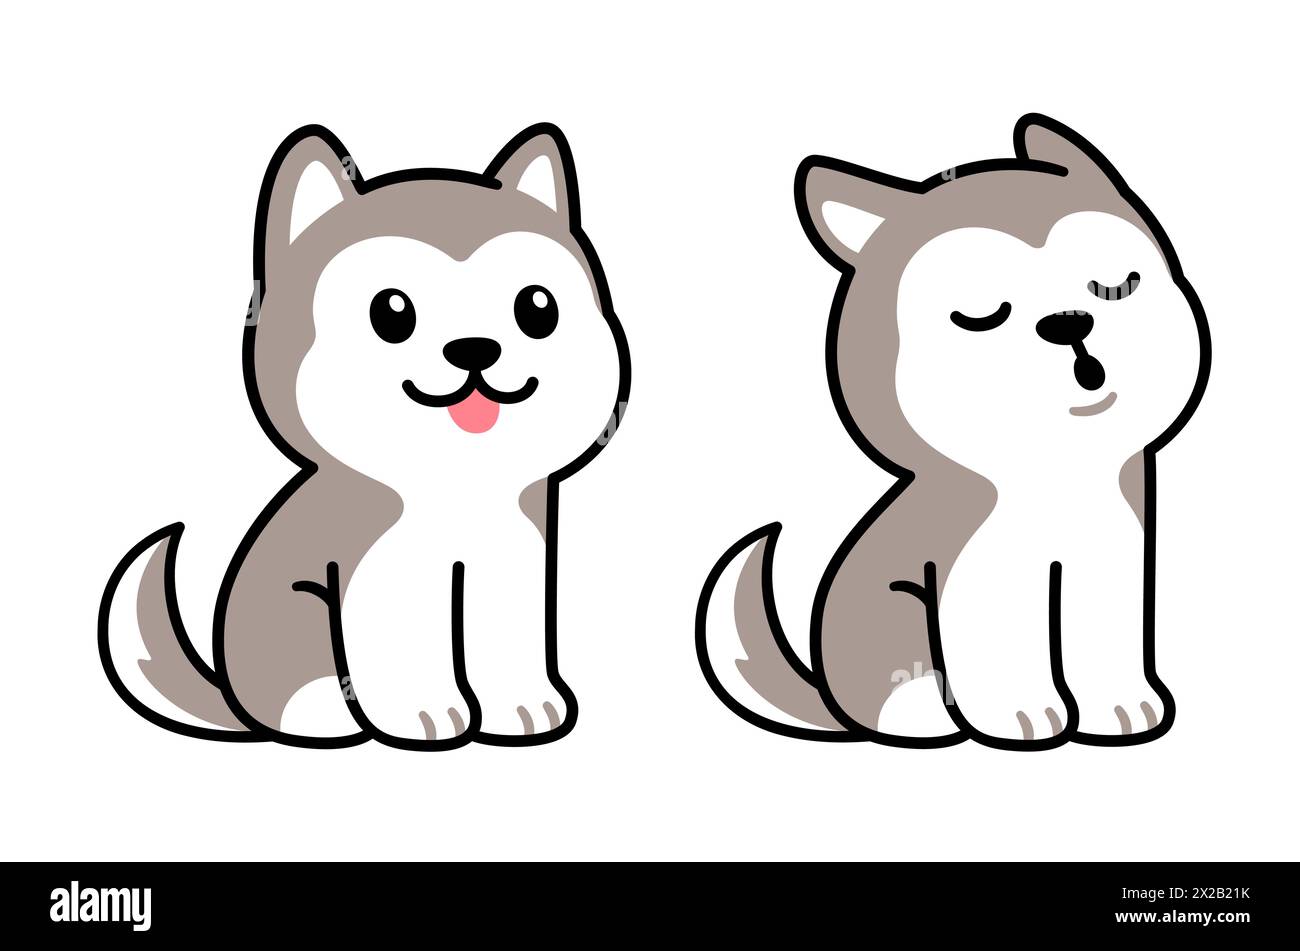 Cute cartoon husky puppy sitting and howling. Adorable little dog drawing, isolated vector illustration. Stock Vector